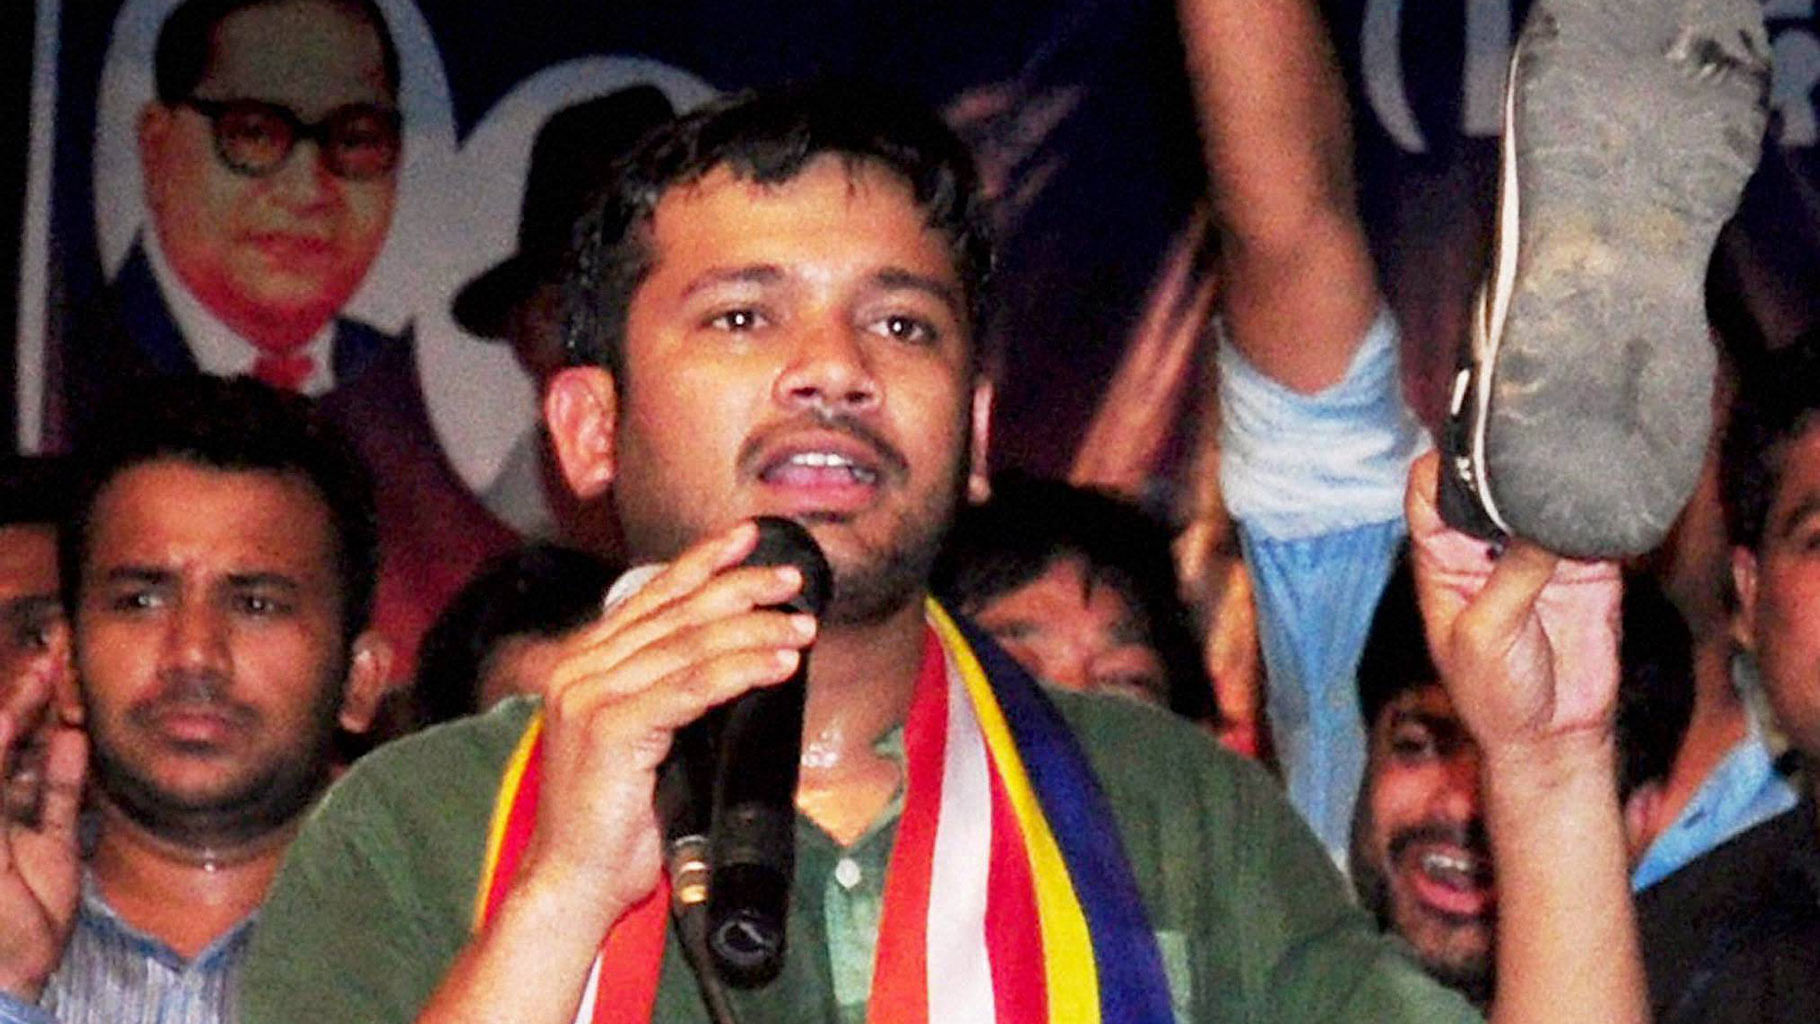 JNUSU President Kanhaiya Kumar showing the shoe that was hurled at him by a Bajrang Dal activist during a lecture session in Nagpur on Thursday. (Photo: PTI)